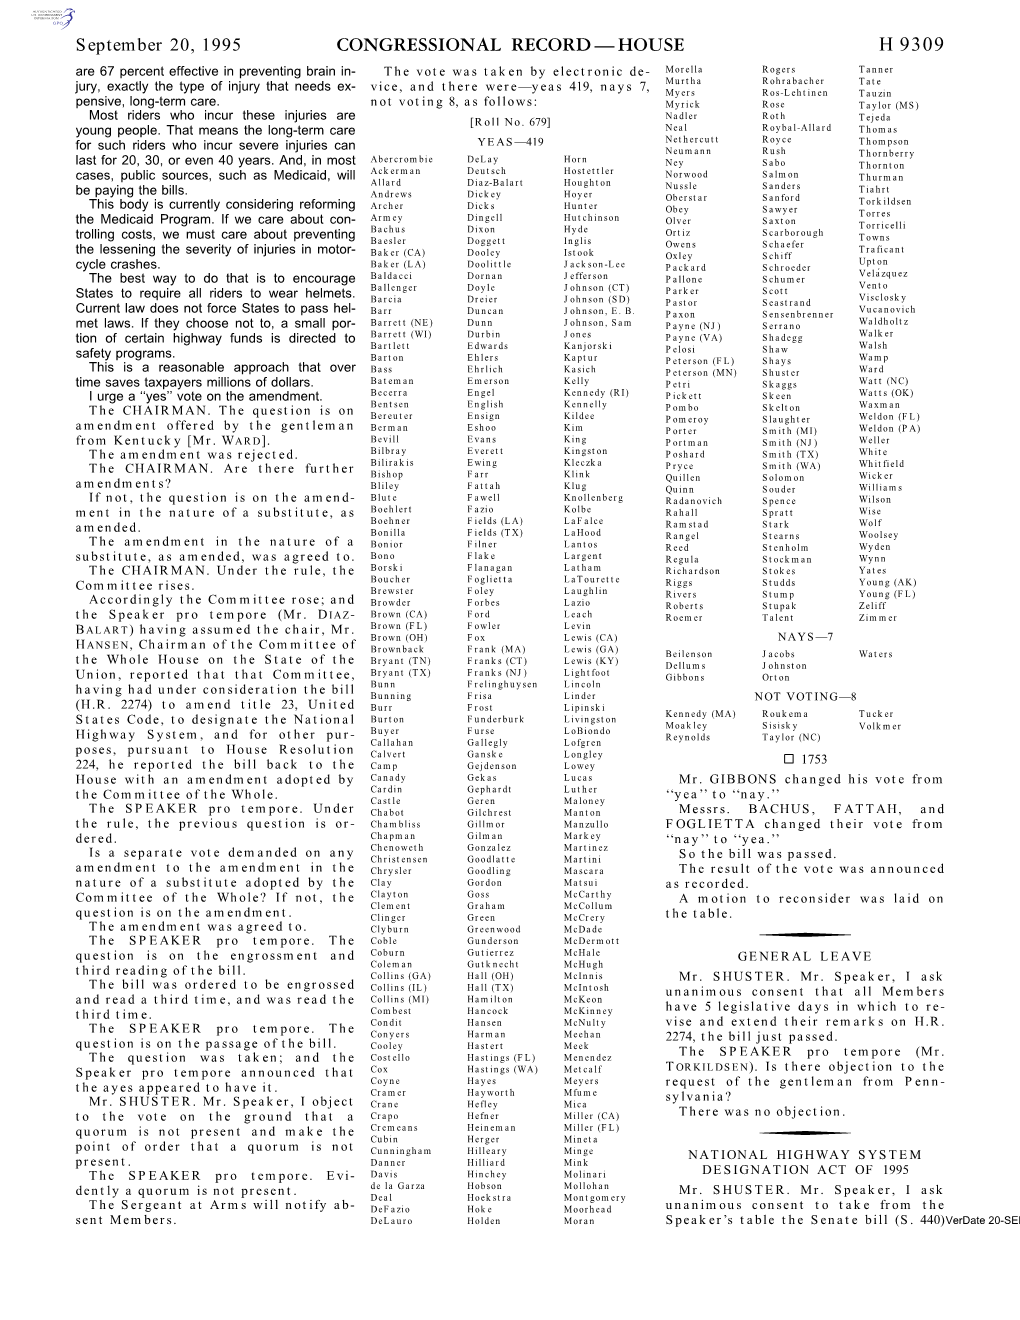 Congressional Record—House H 9309